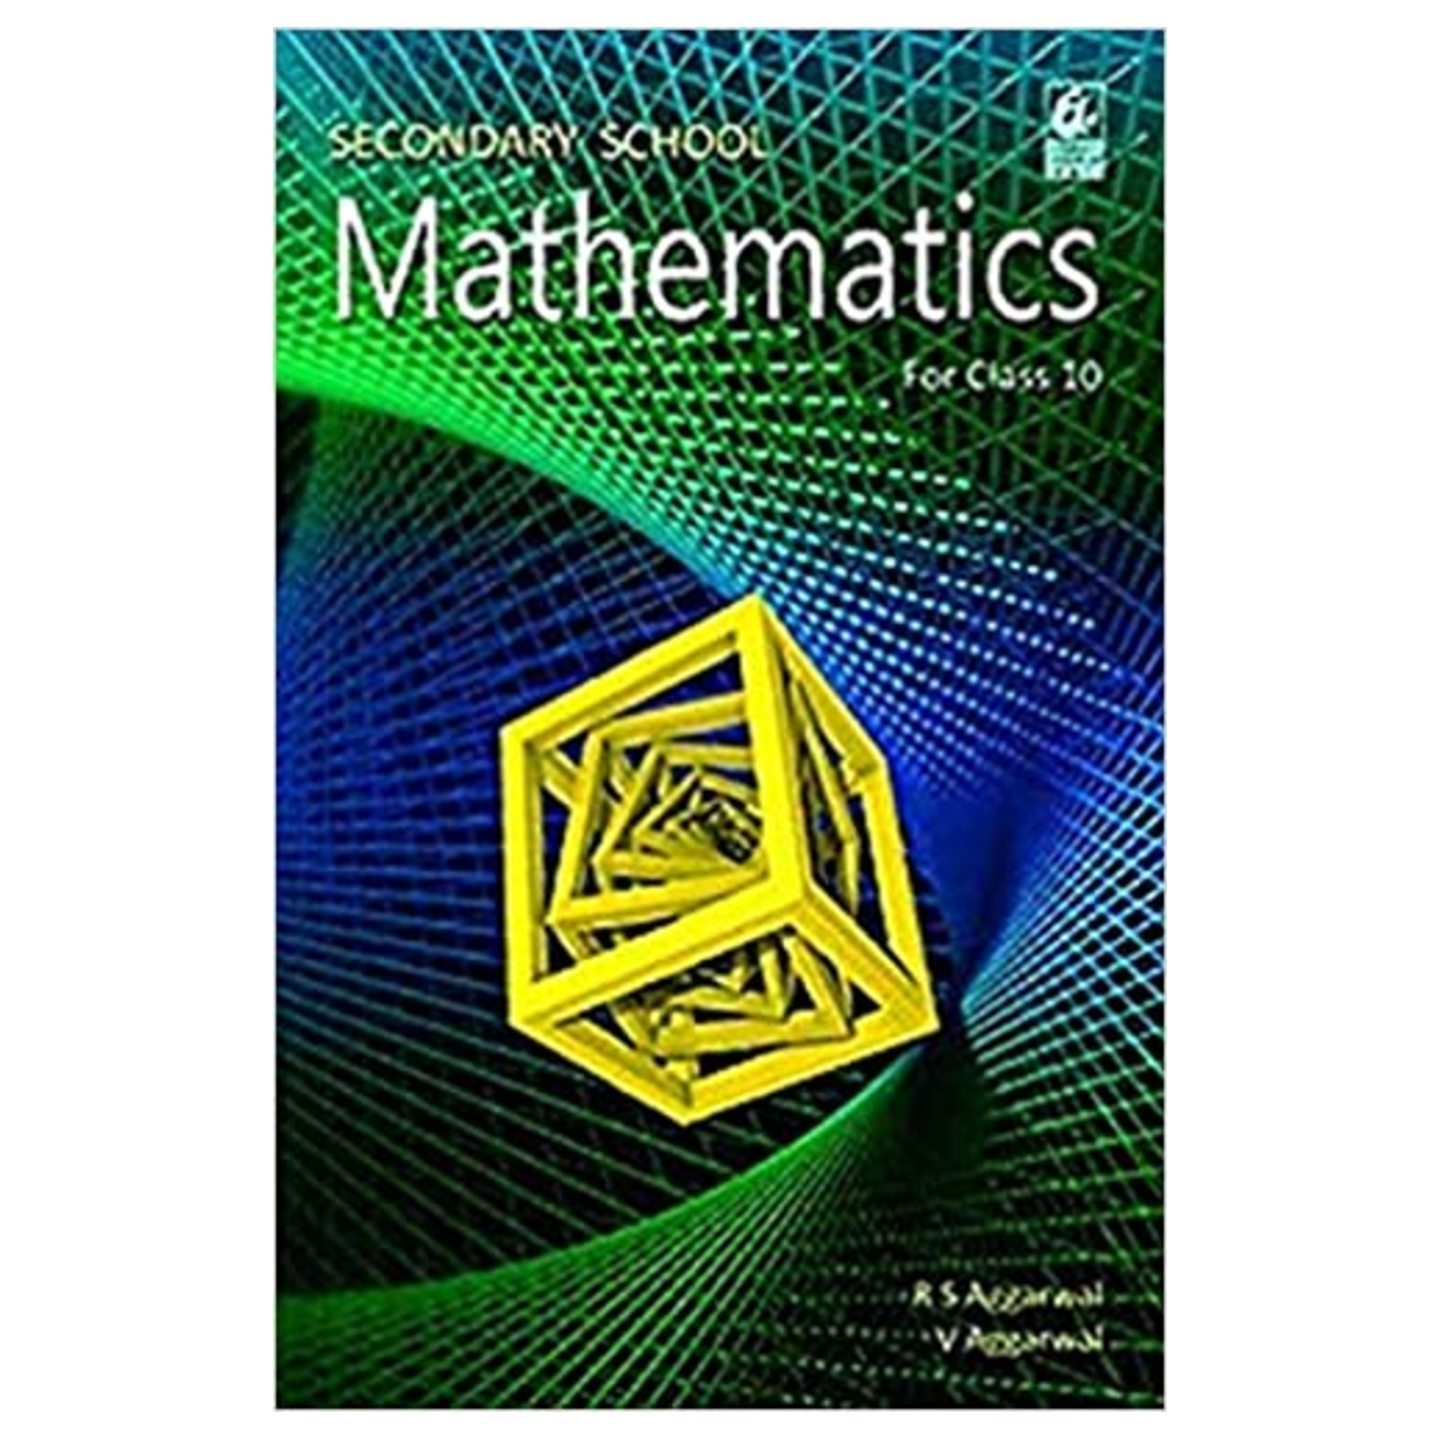 Secondary School Mathematics for Class 10 RS AGGARWAL V AGGARWAL